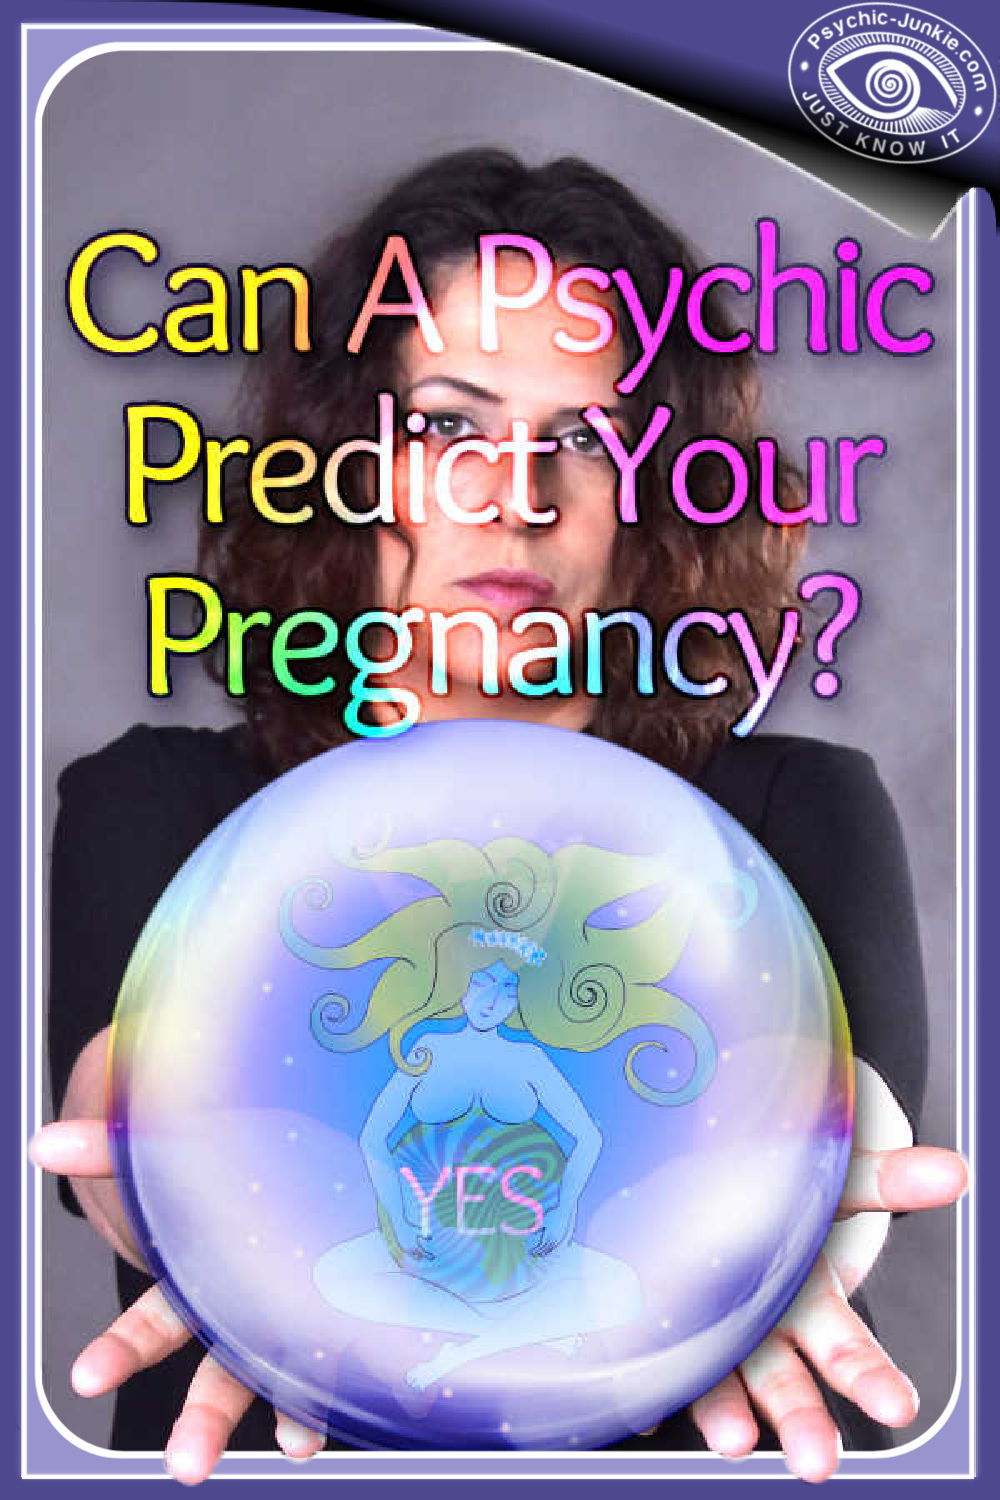 How A Psychic Predicts Pregnancy.